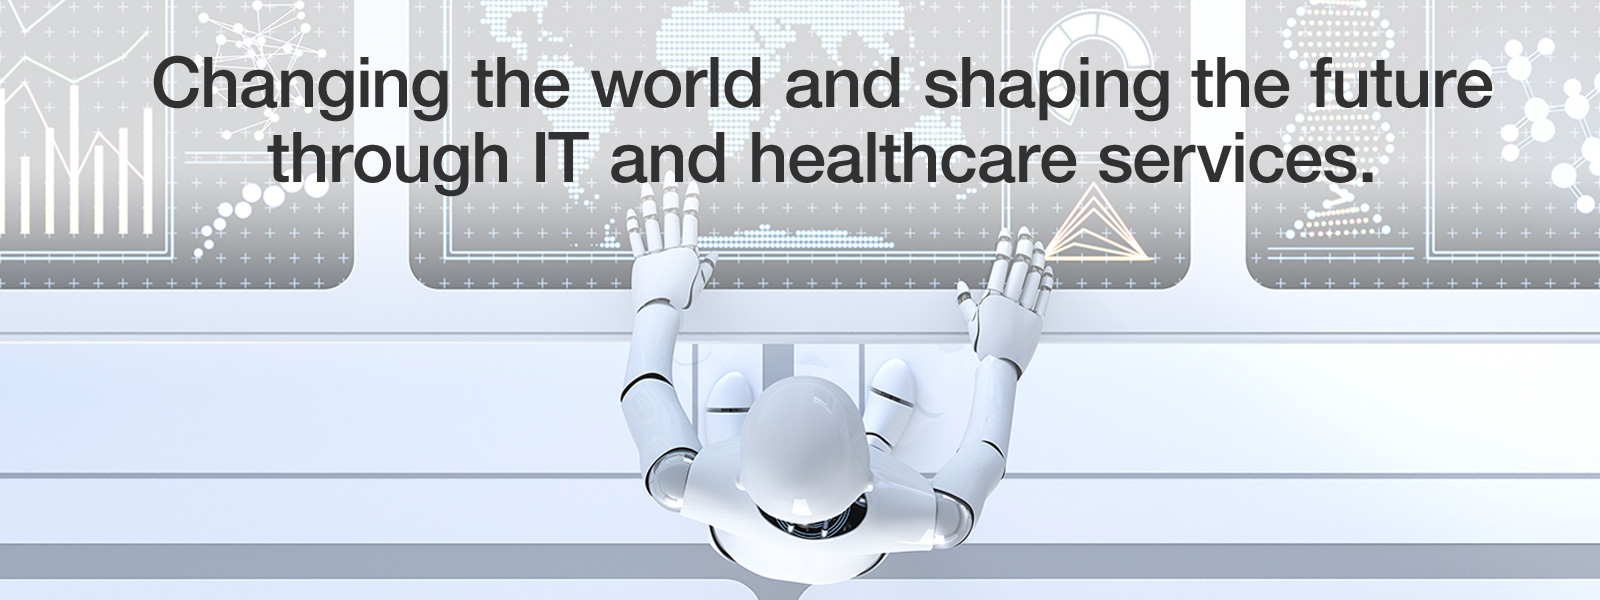 Changing the world and shaping the future through IT and healthcare services.